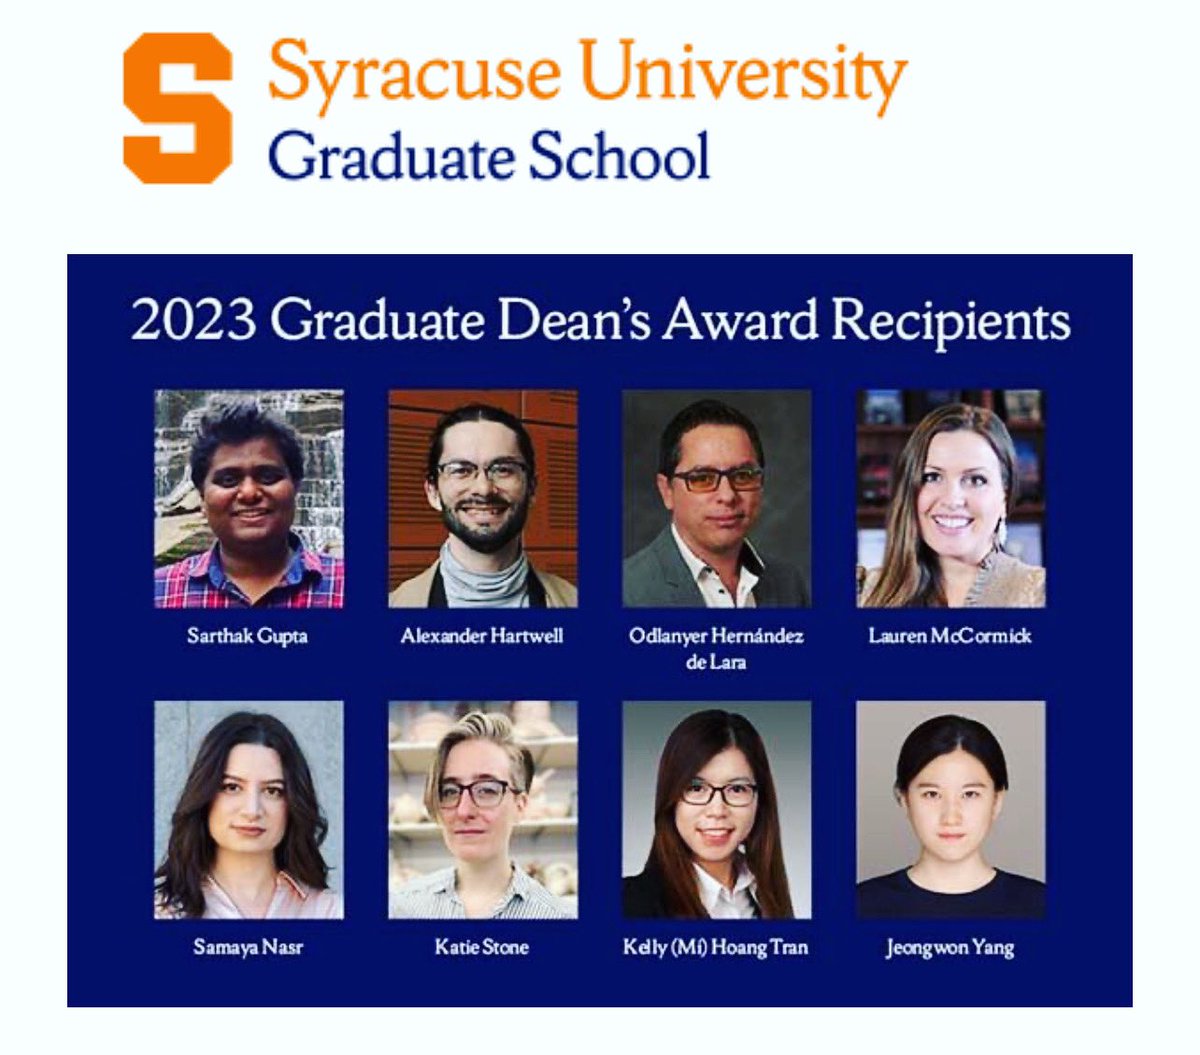 Congratulations to our own @samaya_nasr on winning the Graduate Dean's award for Excellence in Research and Creative Work.

Please join the award ceremony on Friday, March 24, 3 to 5 p.m. in 204 Maxwell Hall. 

#Museumstudies #awards #sugraduatedeansaward